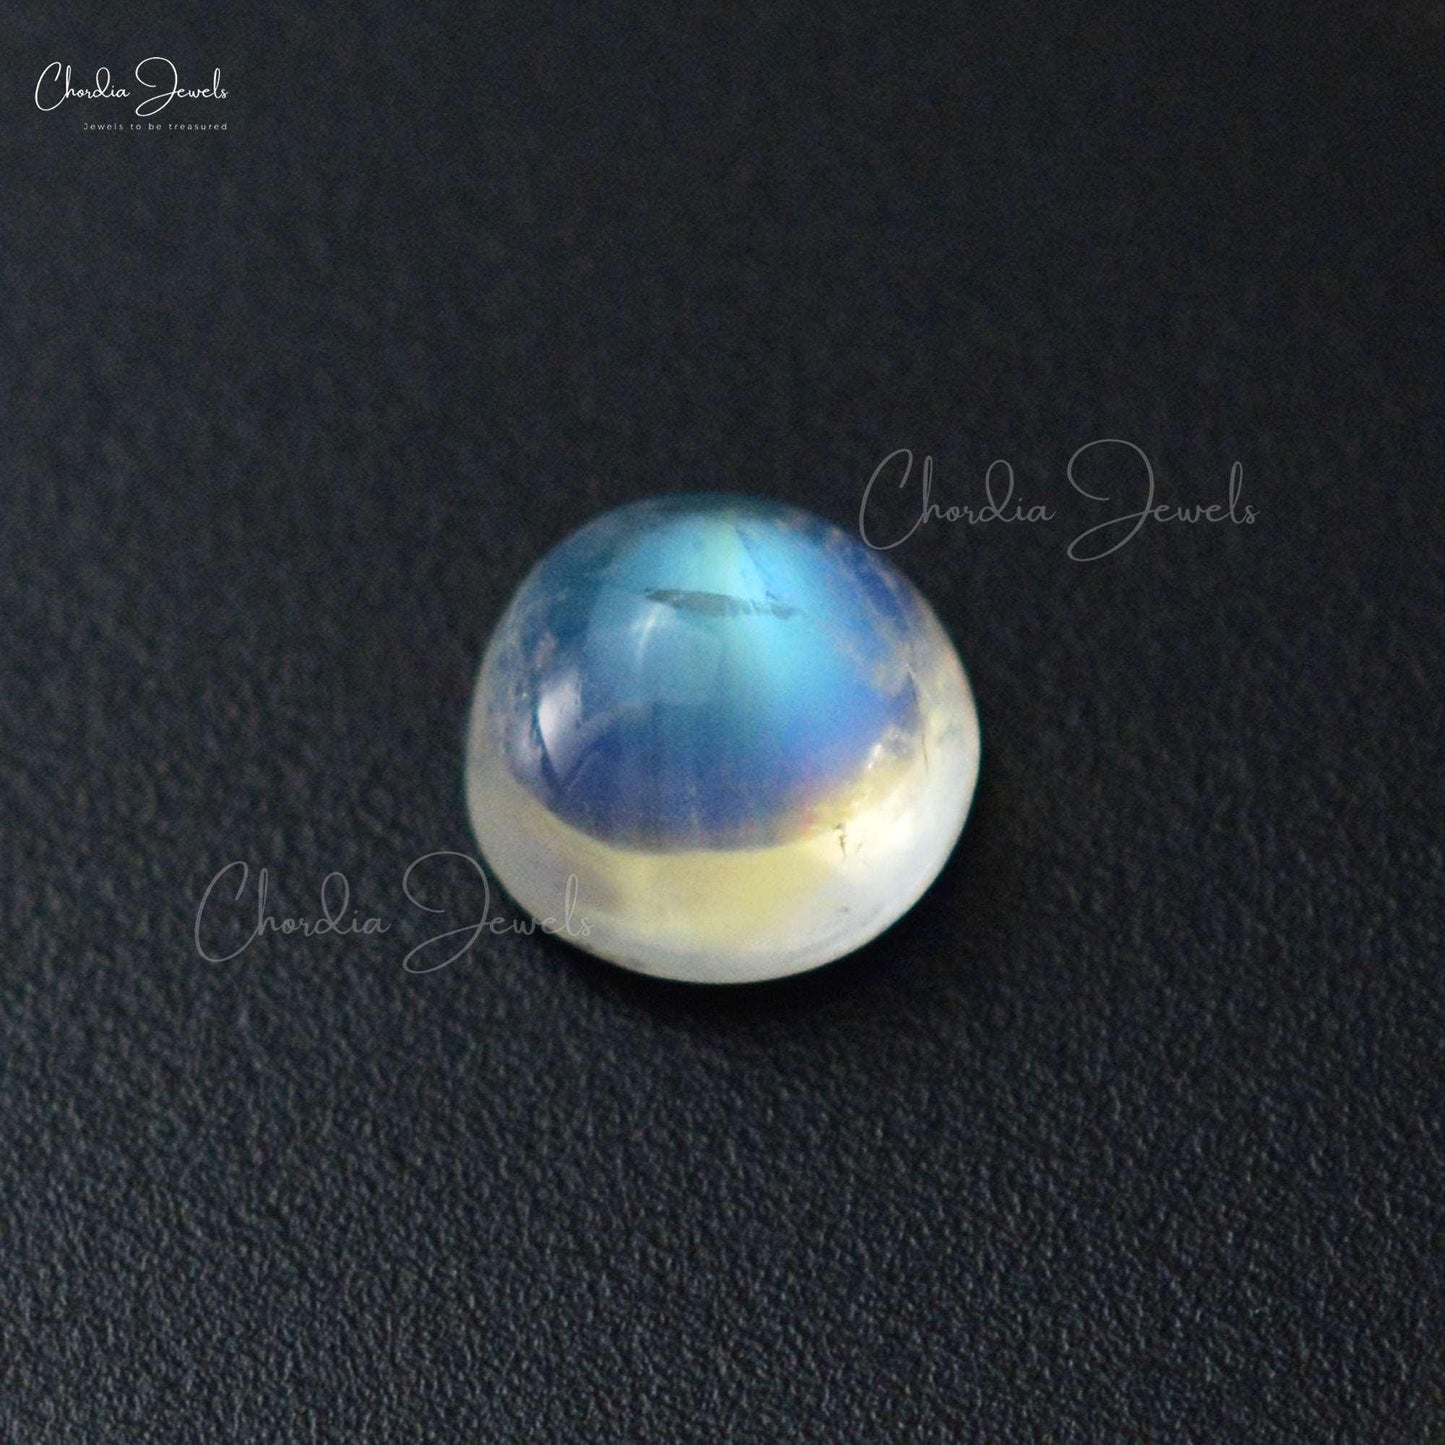 1 Carat Natural Moonstone Smooth Round Cabochon Semi Precious Gemstone At Offer Price, 1 Piece - Chordia Jewels